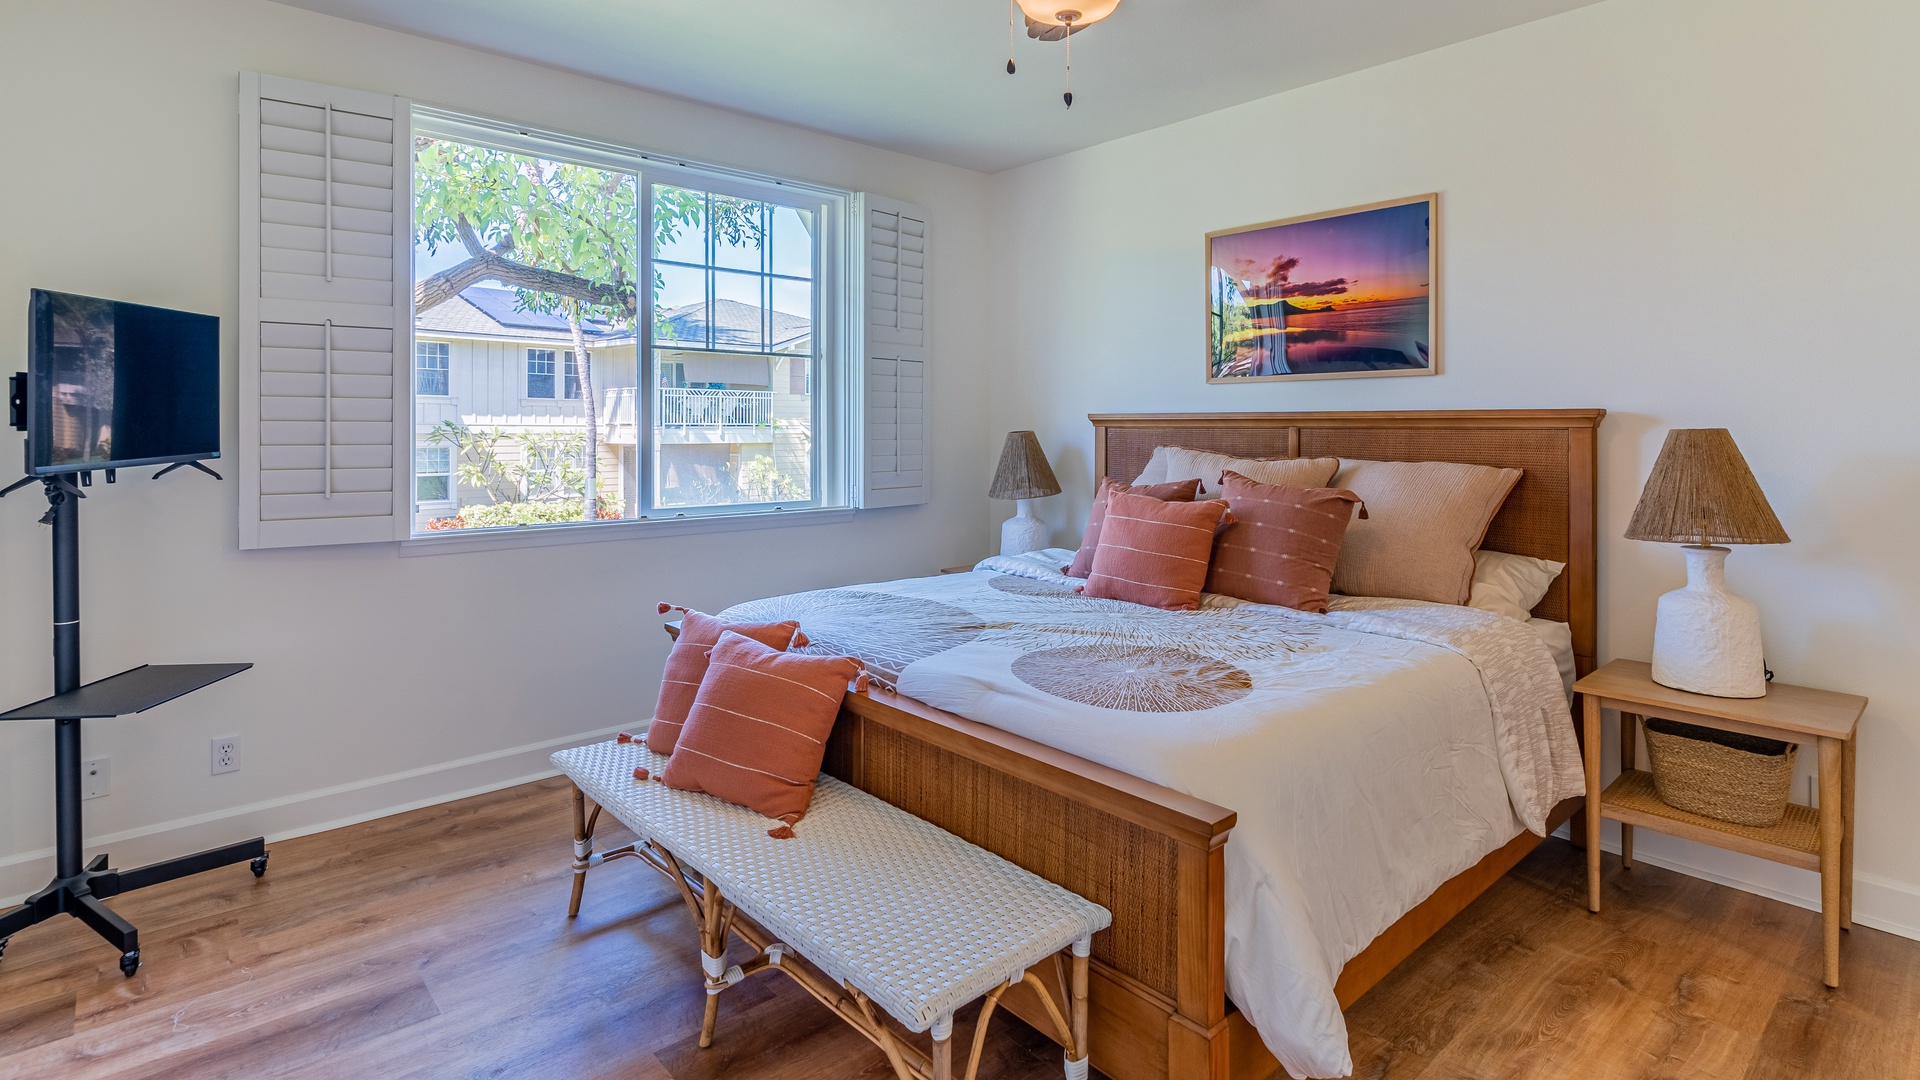 Kapolei Vacation Rentals, Ko Olina Kai 1033A - The primary guest bedroom features a king bed, TV, bench seating and scenery.